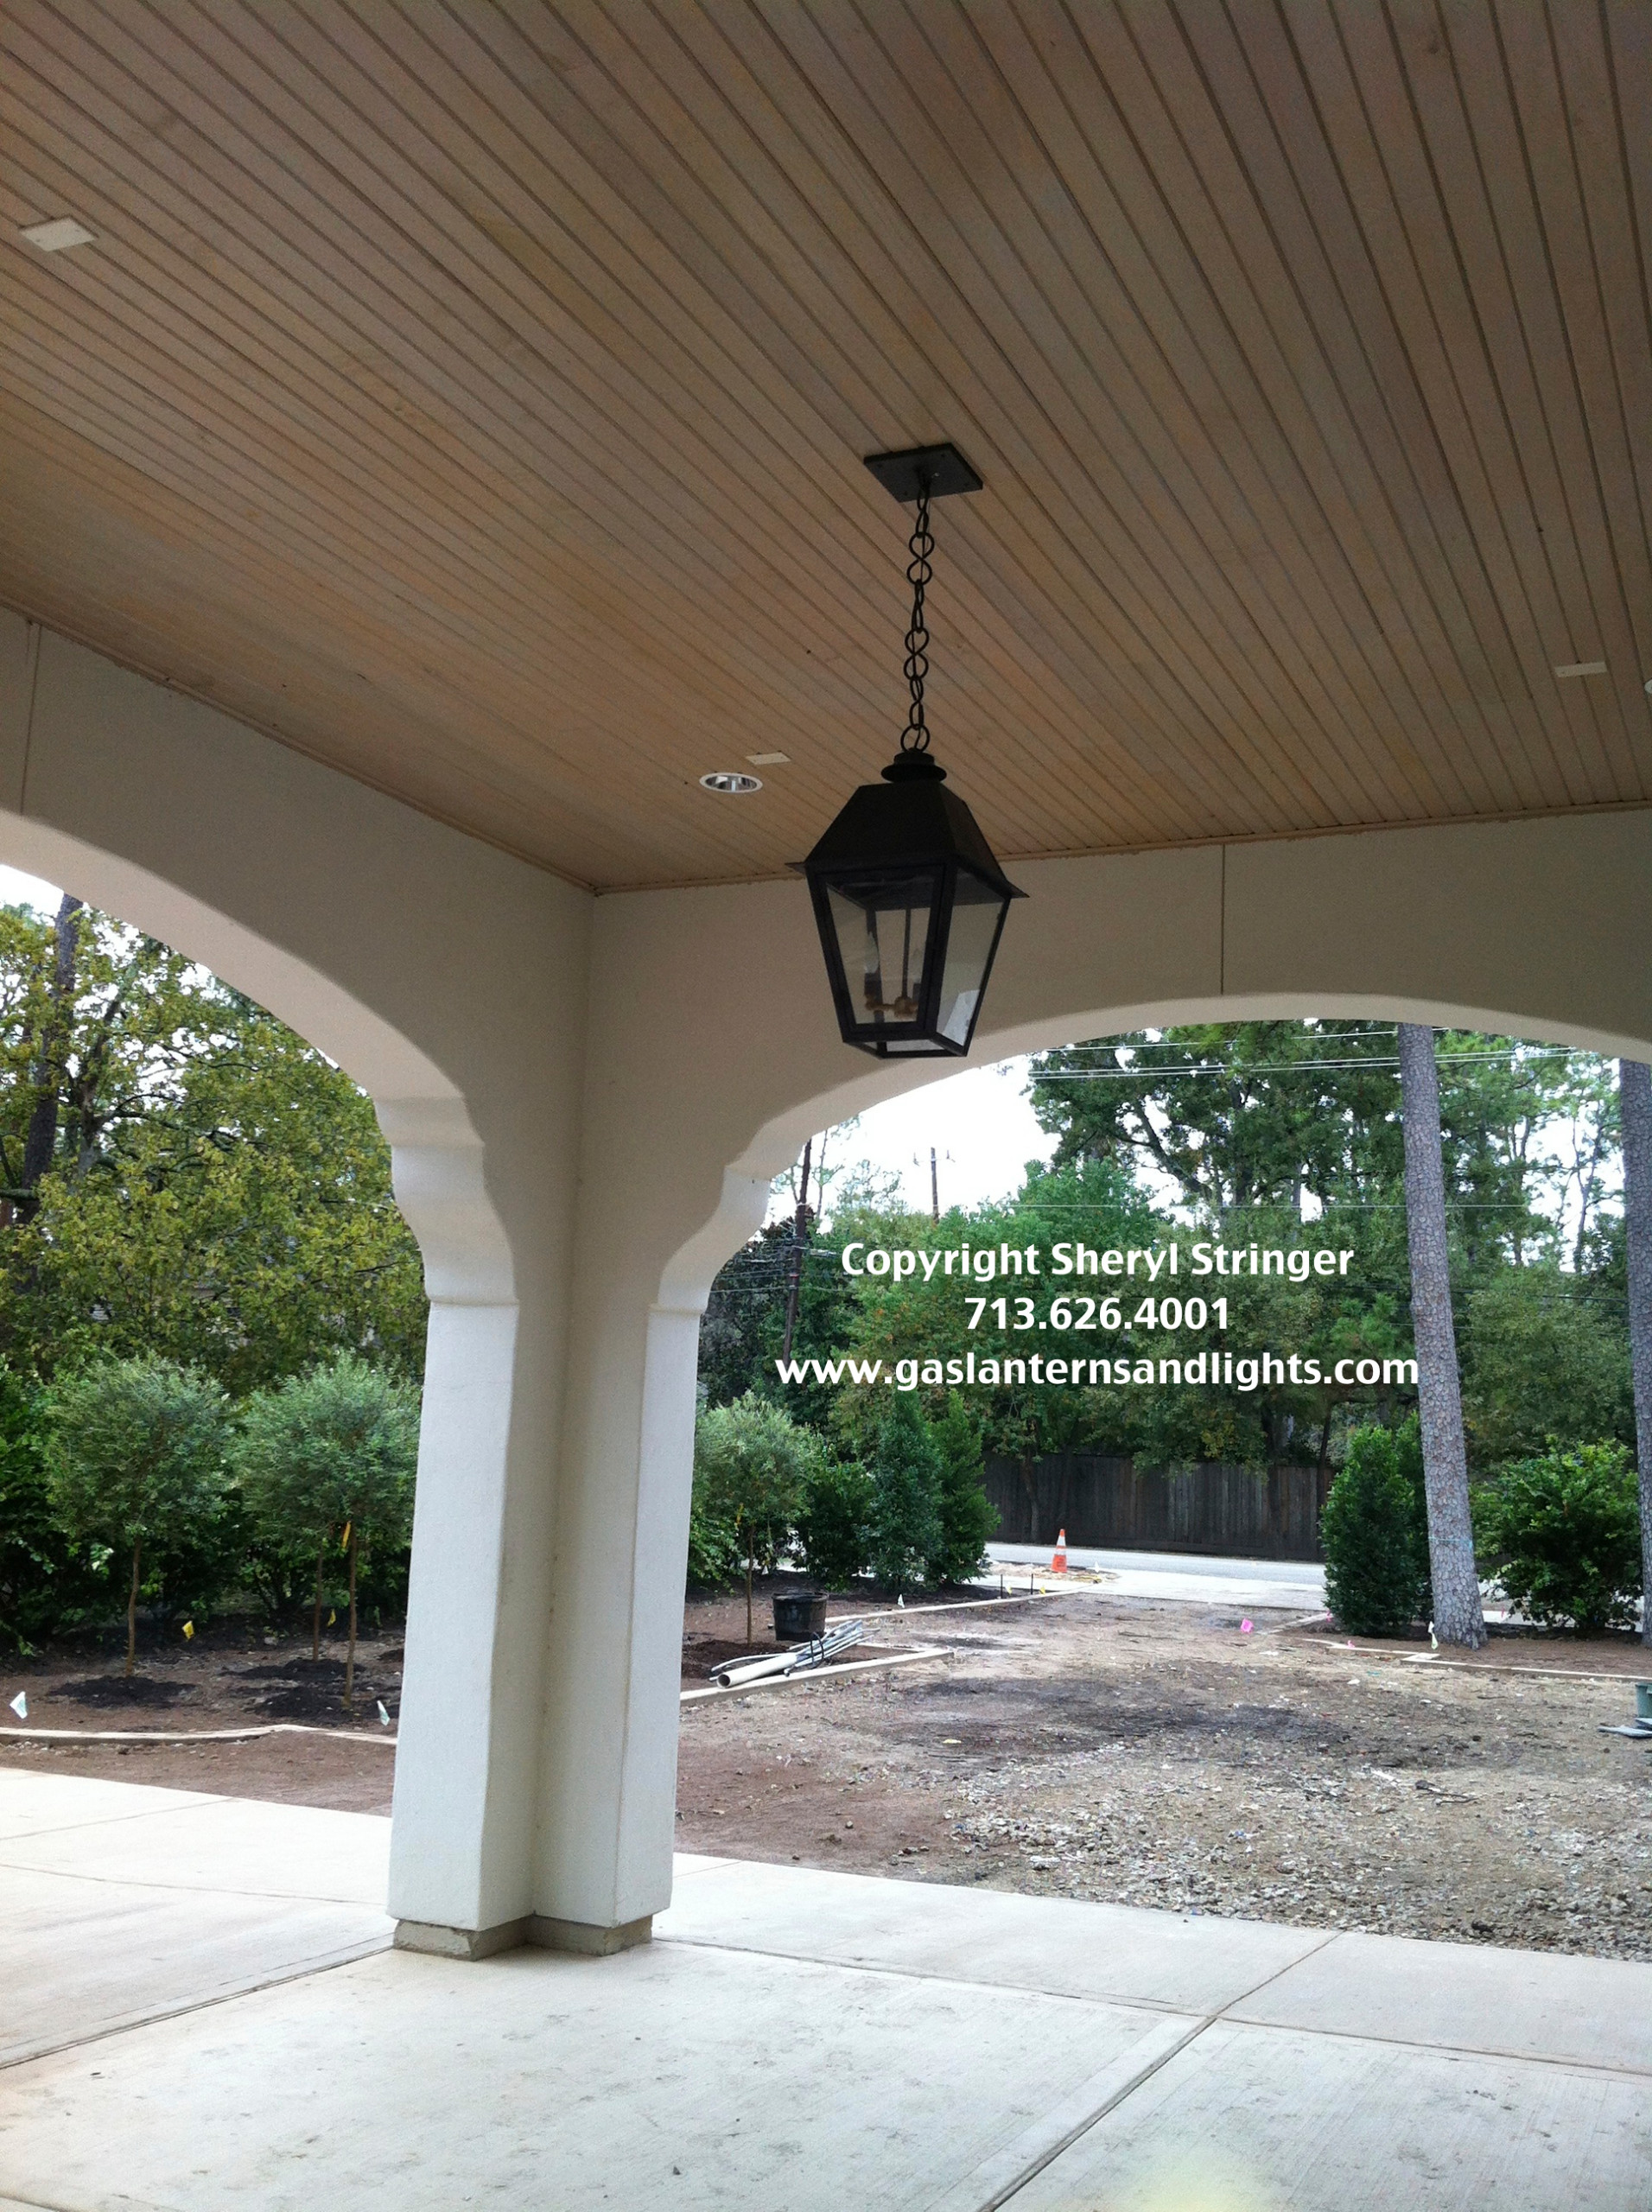 Sheryl's Style 1 Electric Lantern Hanging by Copper Chain